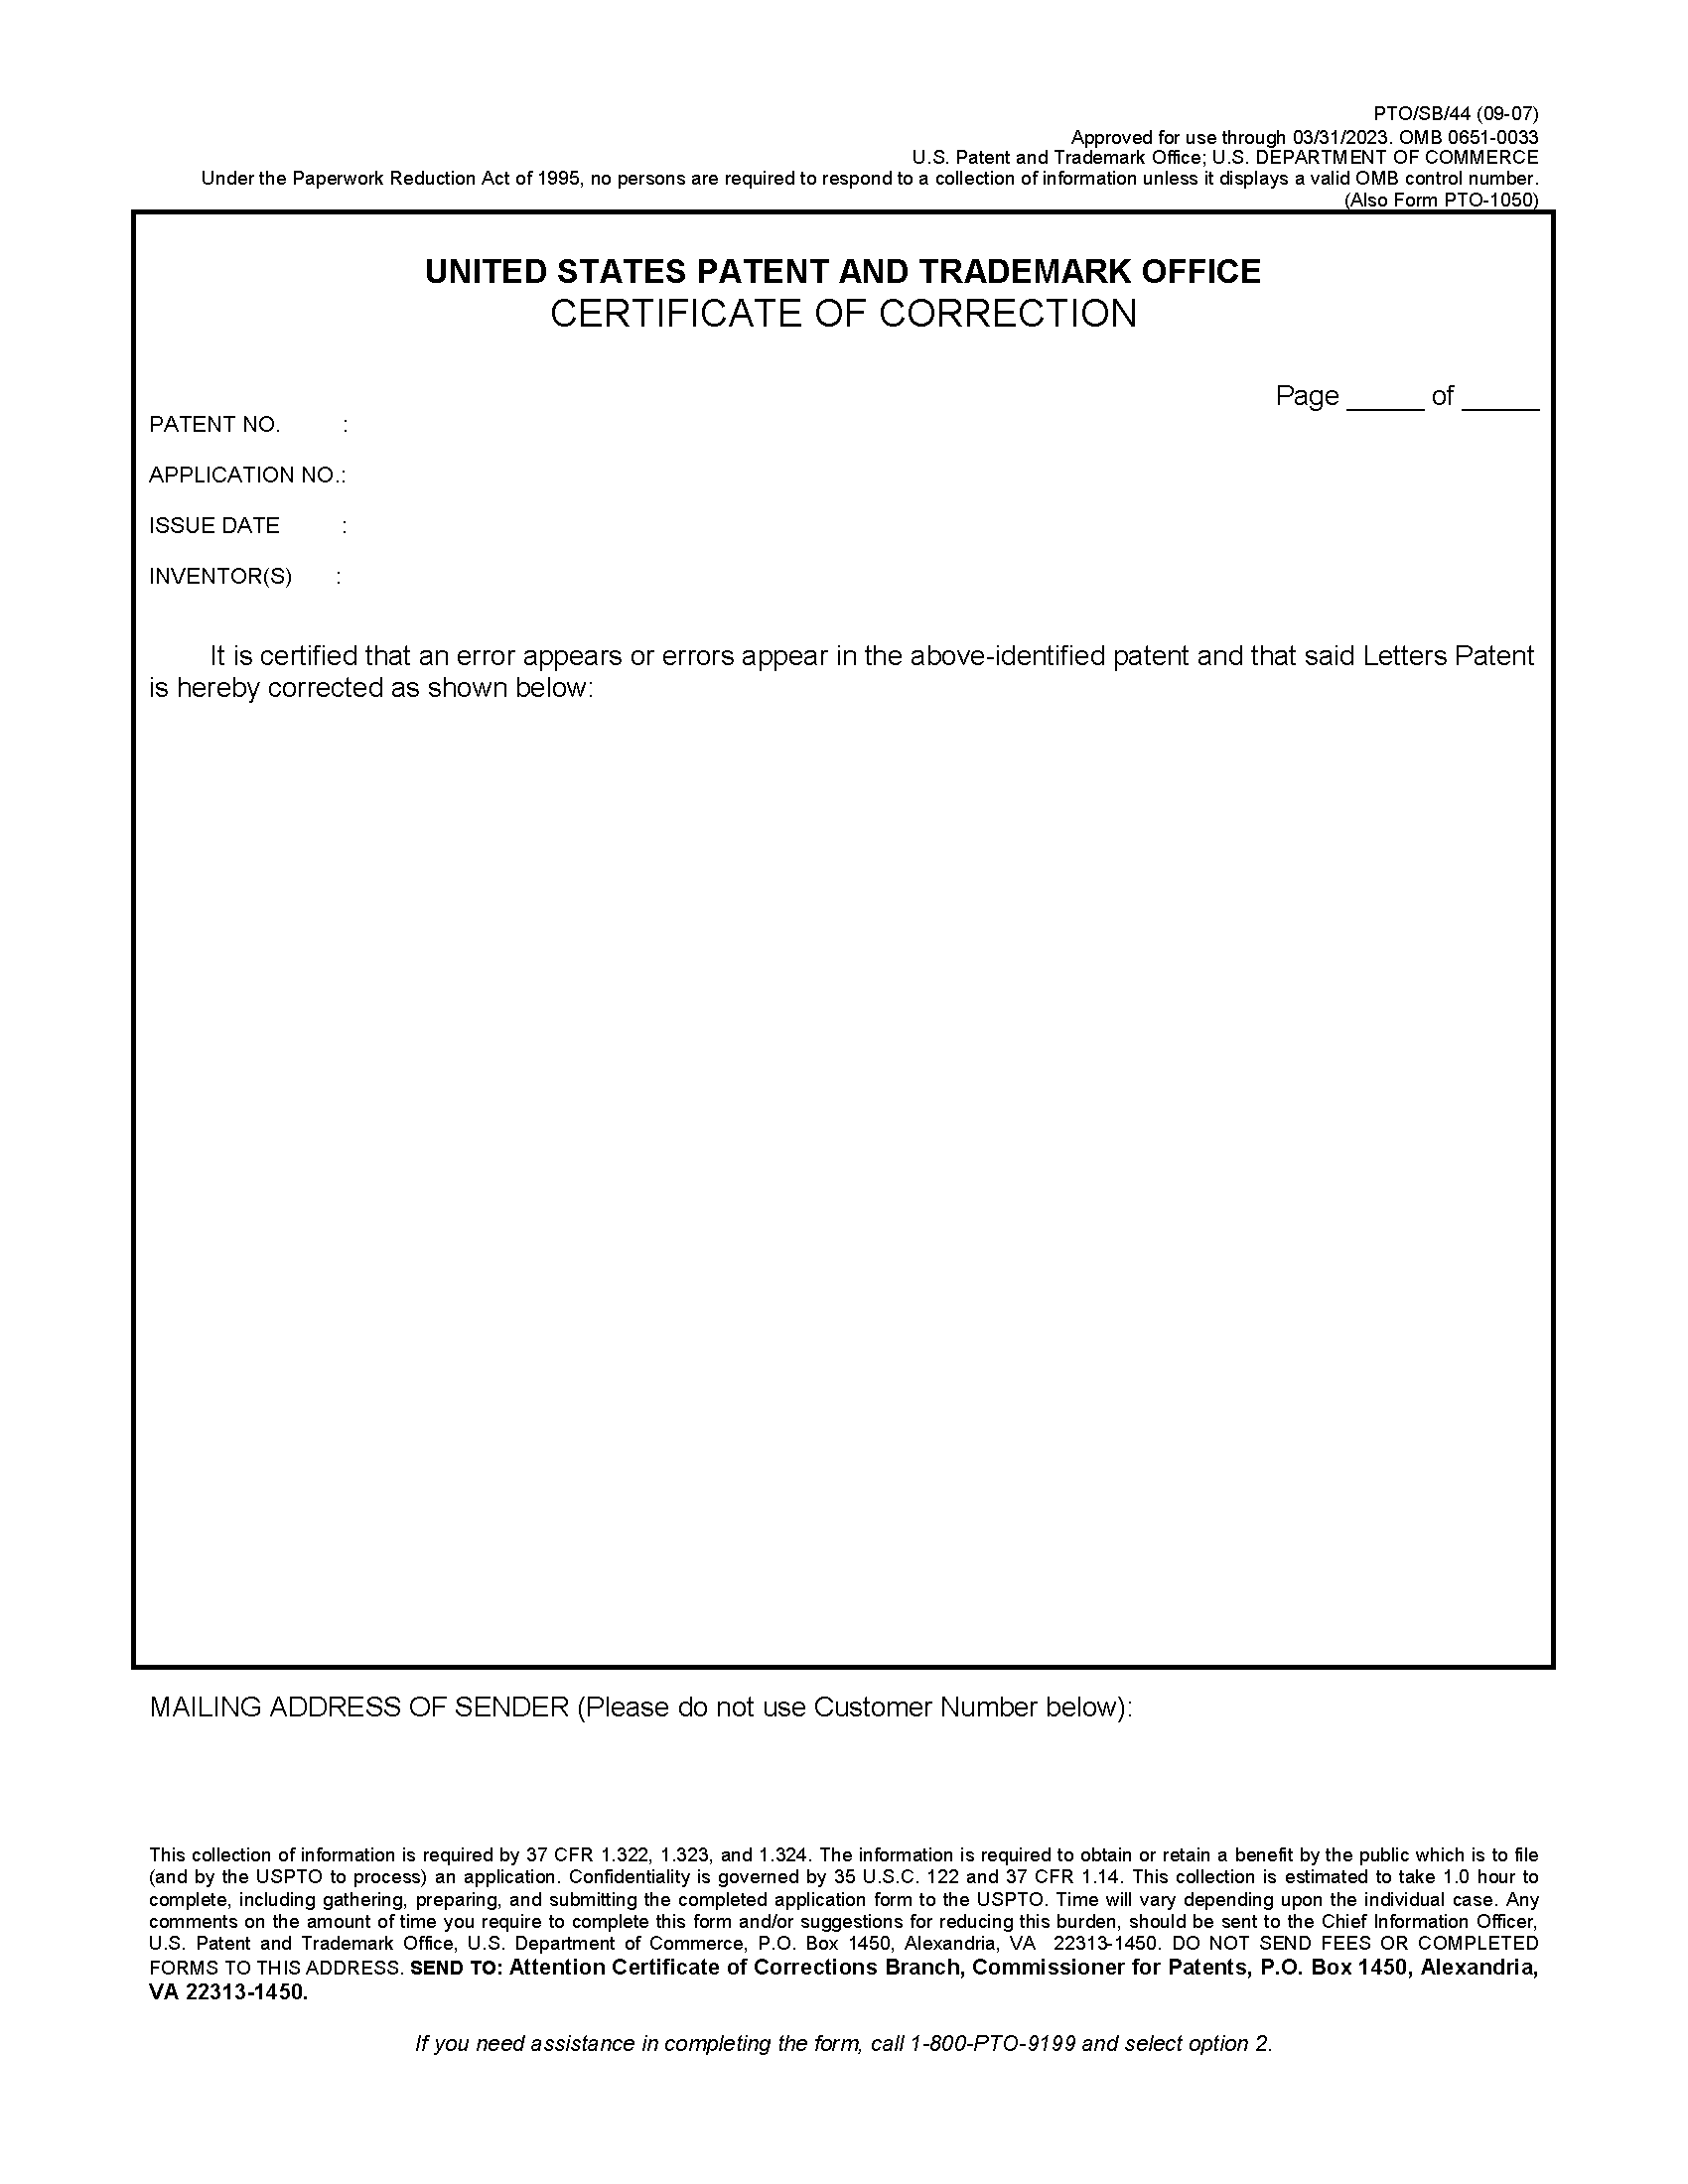 Certificate of Correction Page 1